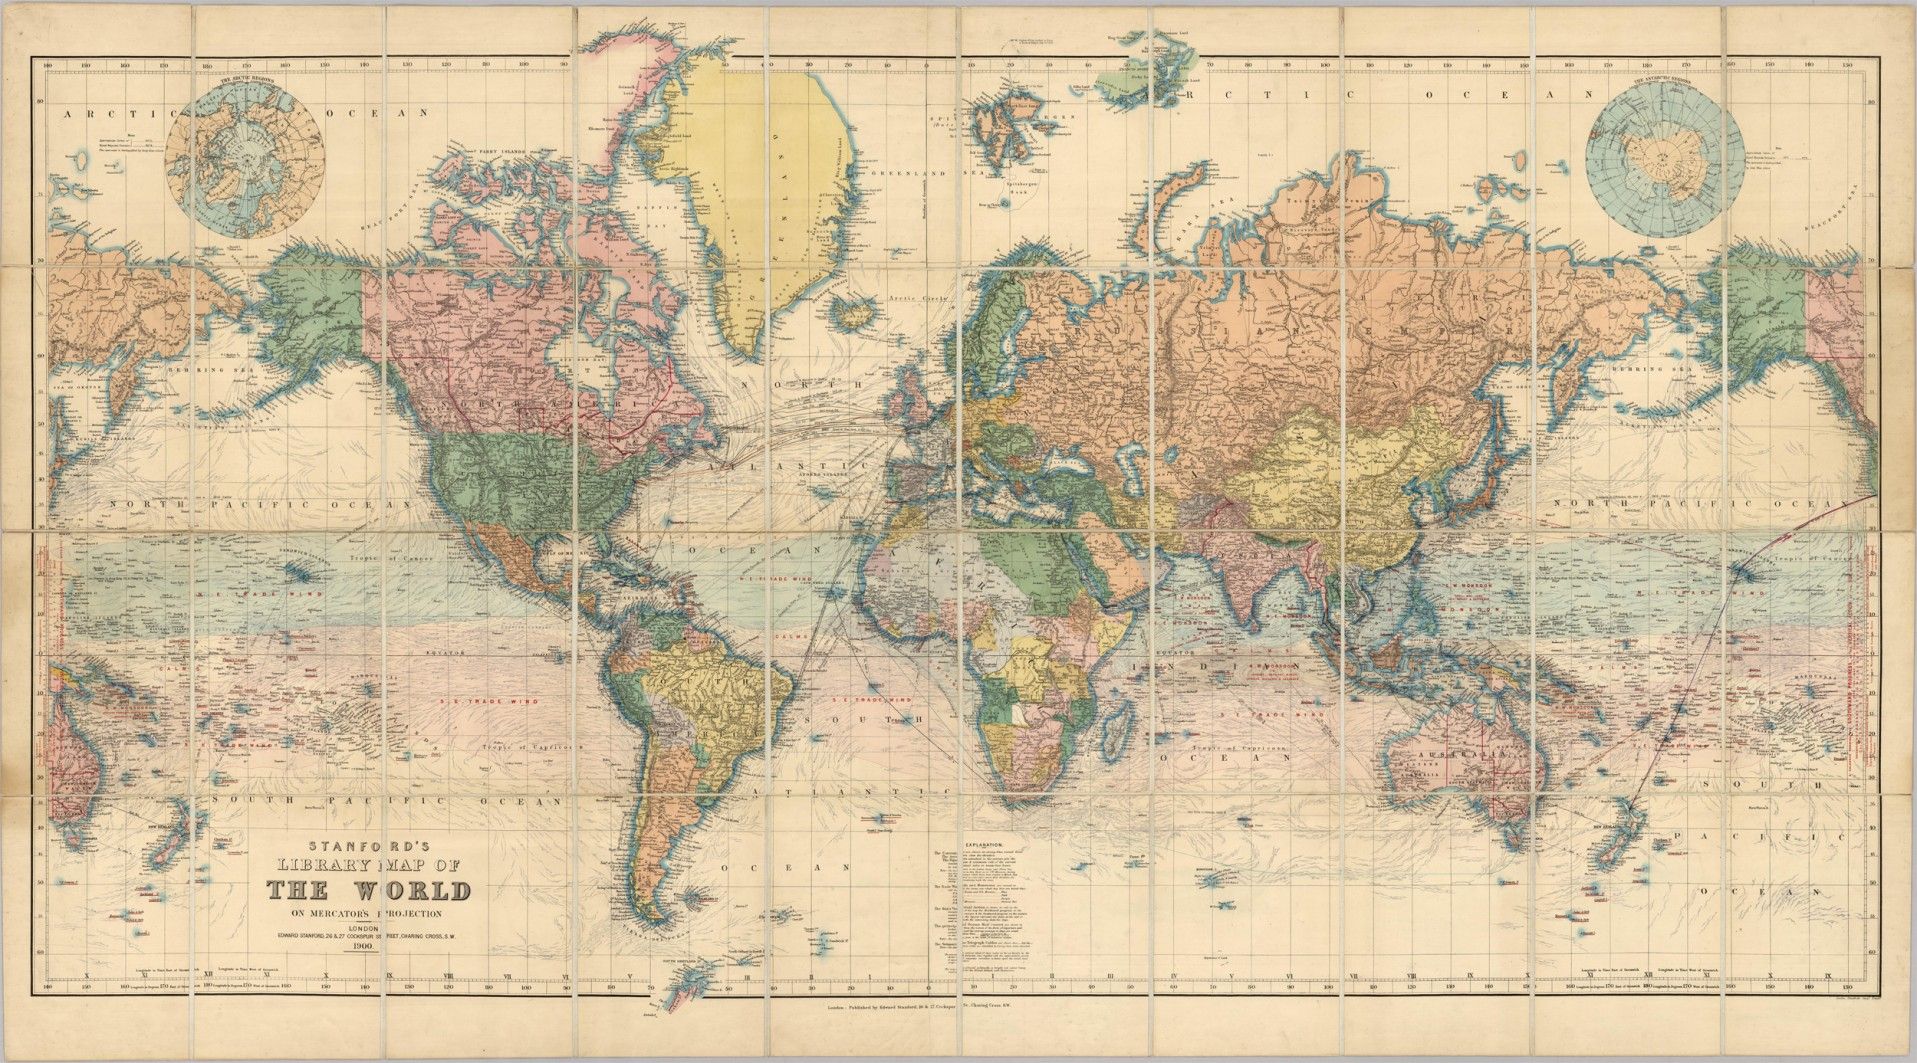 Stanford's World Map 1900 - Majesty Maps and Prints | World map, Big world  map, Old map